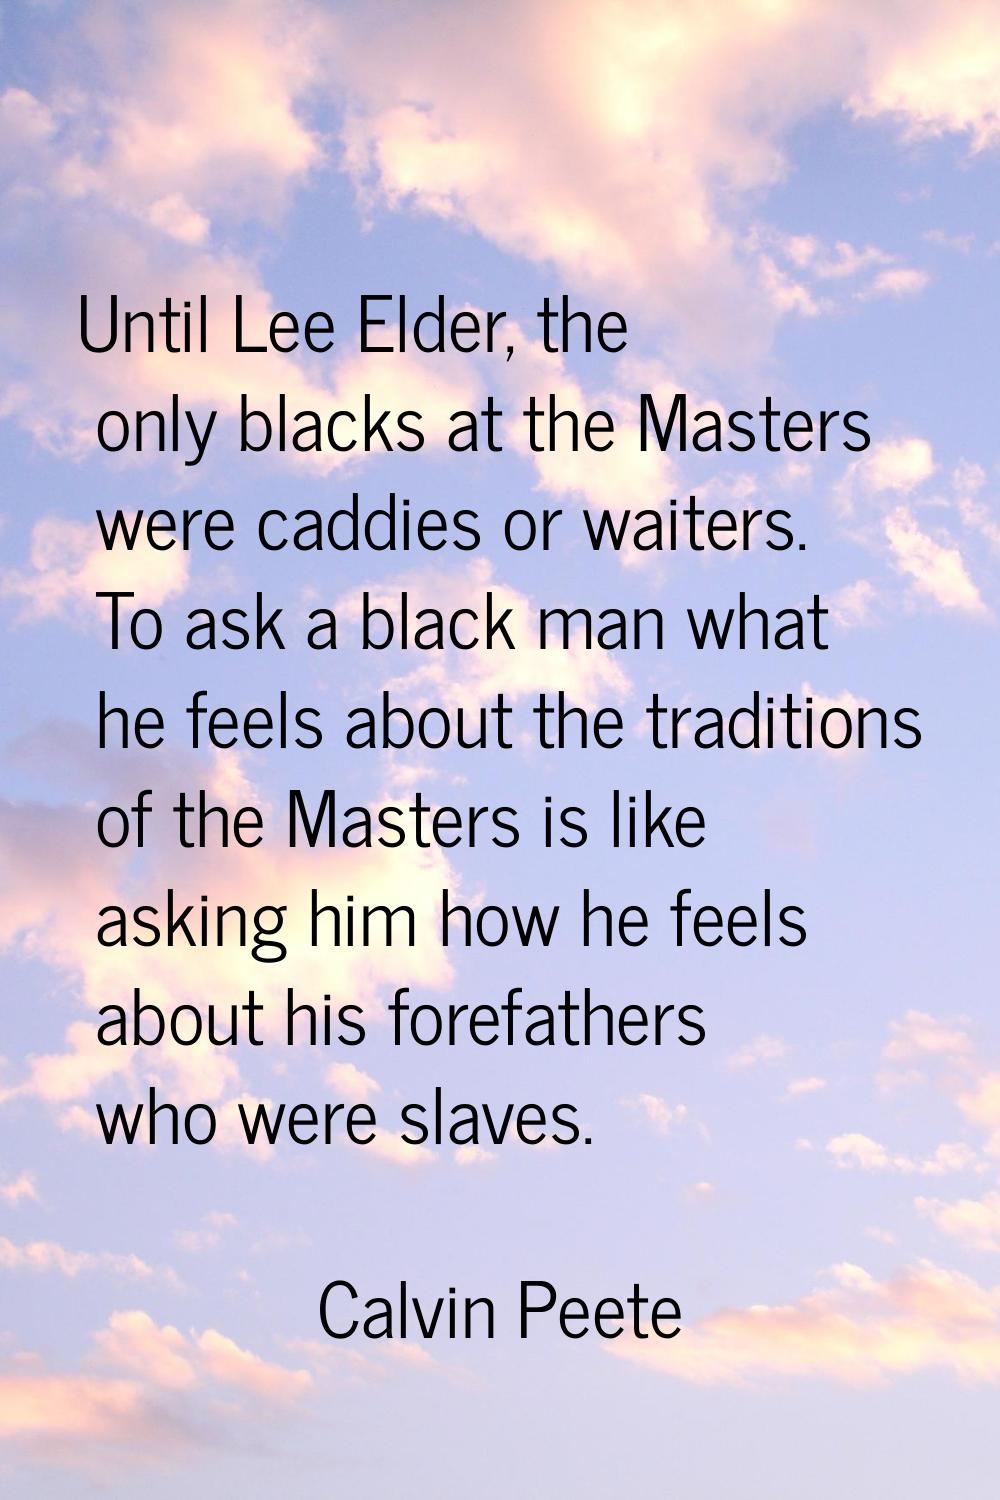 Until Lee Elder, the only blacks at the Masters were caddies or waiters. To ask a black man what he